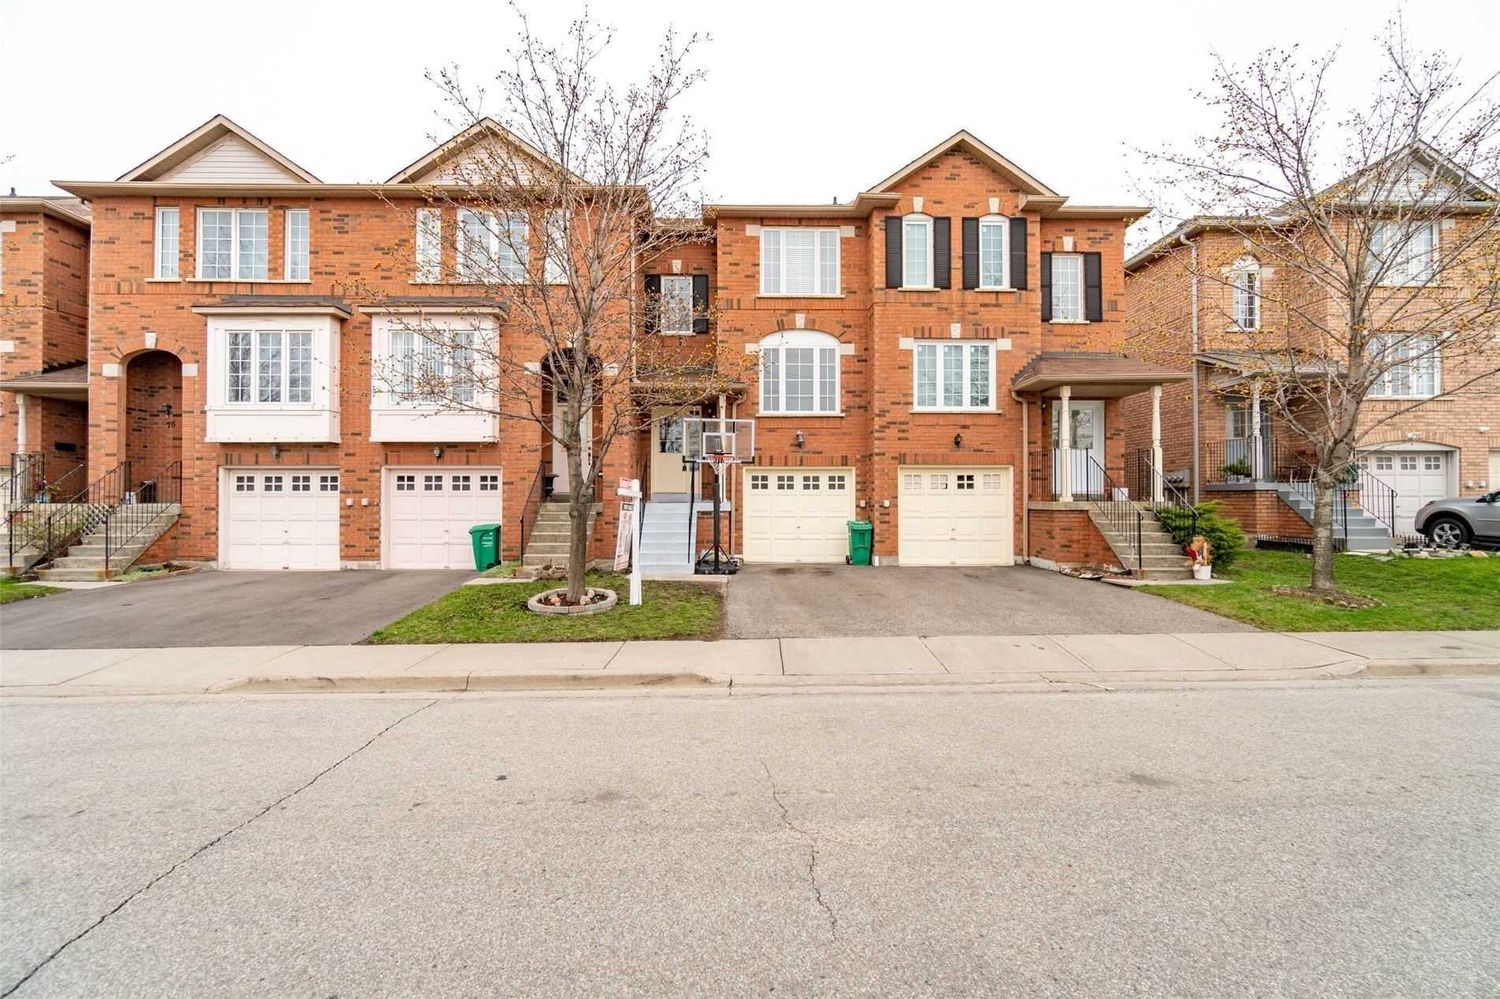 2 Clay Brick Court. 2 Clay Brick Court Townhomes is located in  Brampton, Toronto - image #1 of 2